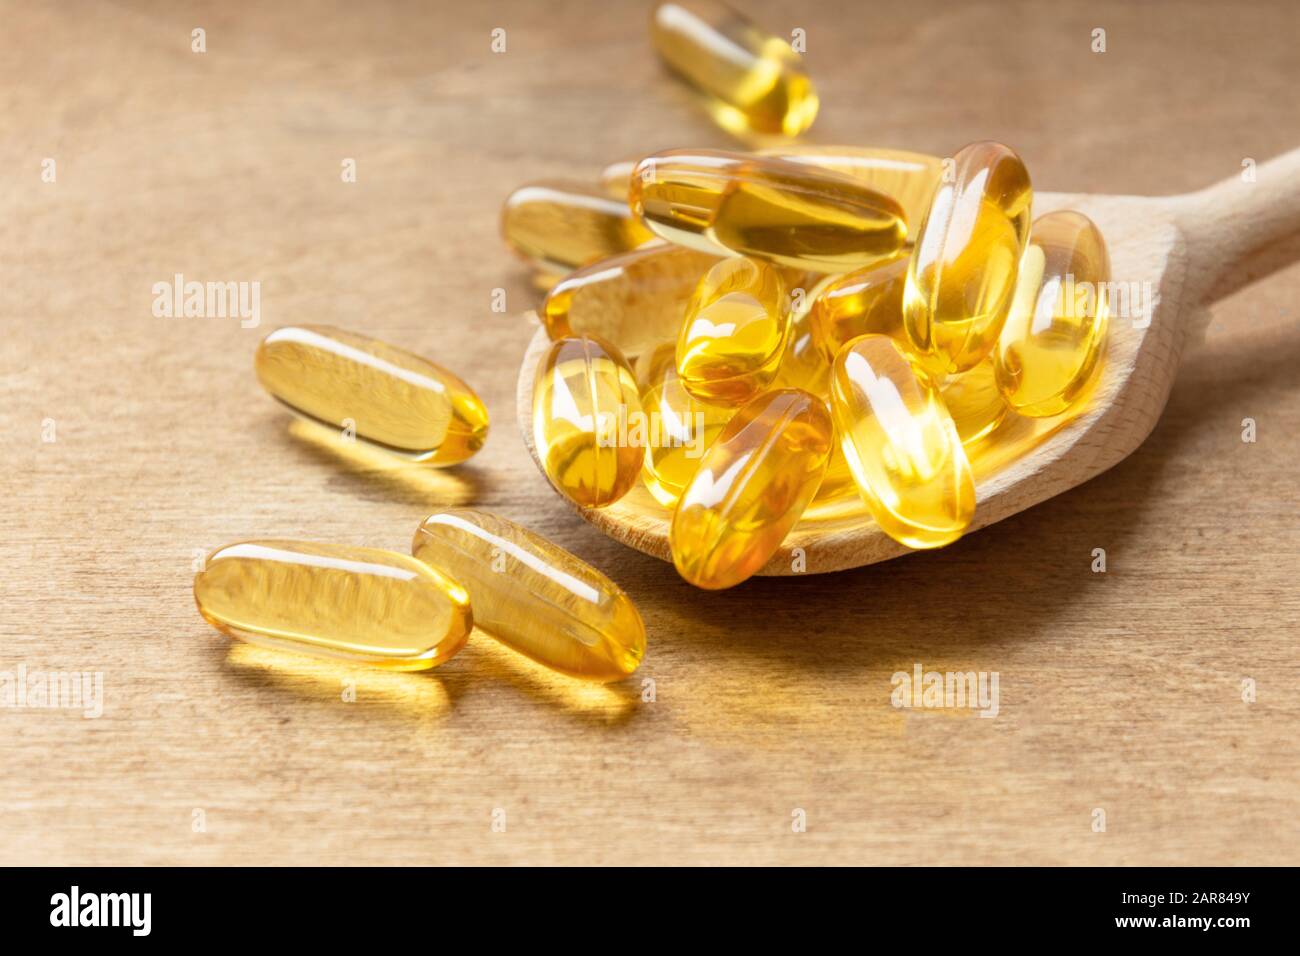 Cod liver oil omega 3 gel capsules on a spoon on wooden background. Fish oil  vitamins Stock Photo - Alamy